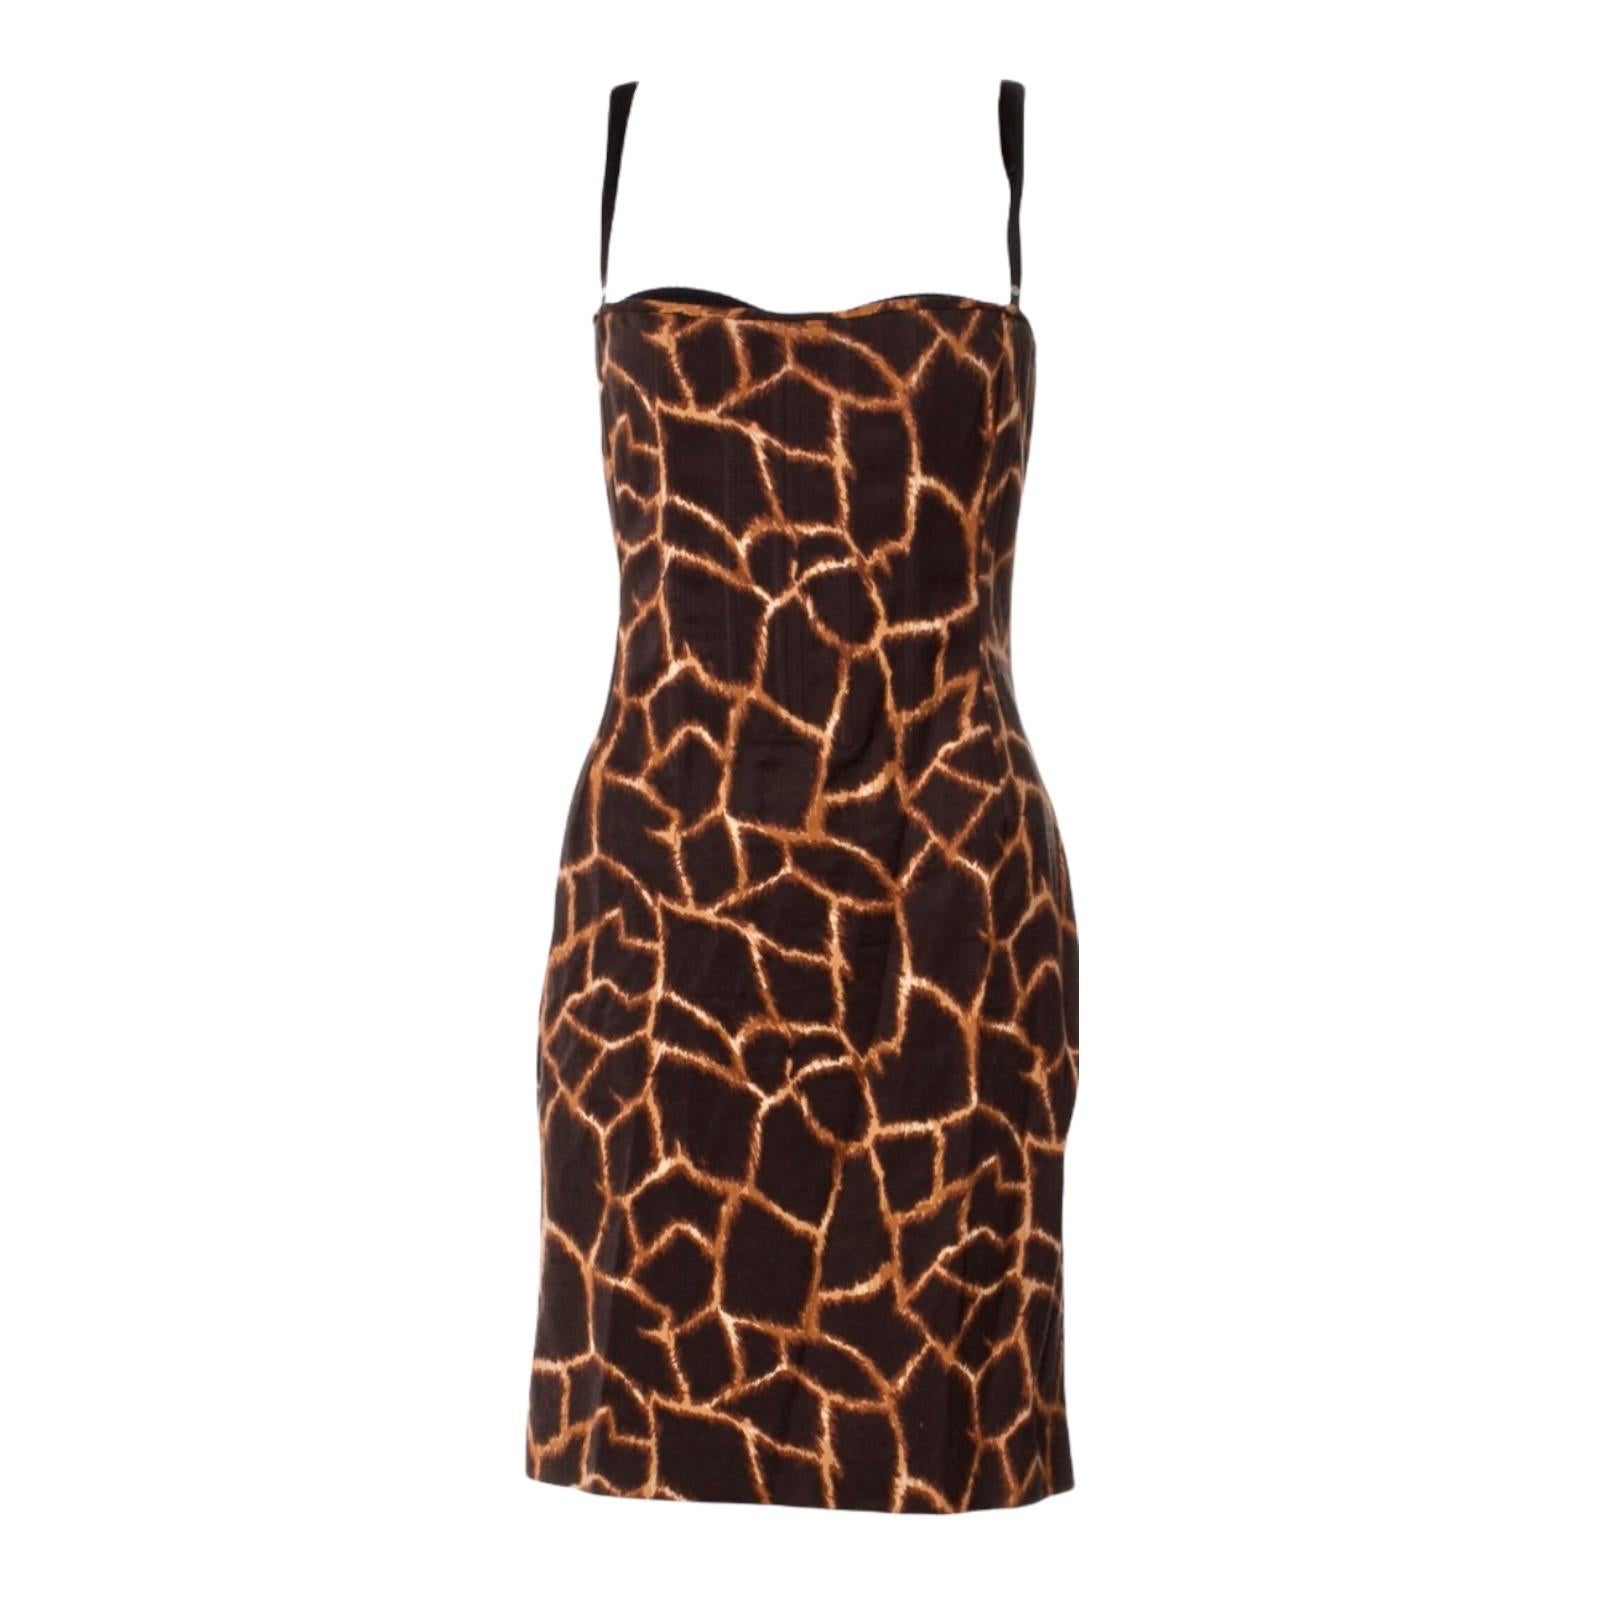 BREATHTAKING 

DOLCE & GABBANA 

ANIMAL PRINT CORSET DRESS

COLLECTOR'S PIECE

SEEN ON BEYONCE AND SATC'S SAMANTHA

DETAILS: 

A DOLCE & GABBANA classic signature piece that will last you for years
One of the key pieces of that collection
Beautiful